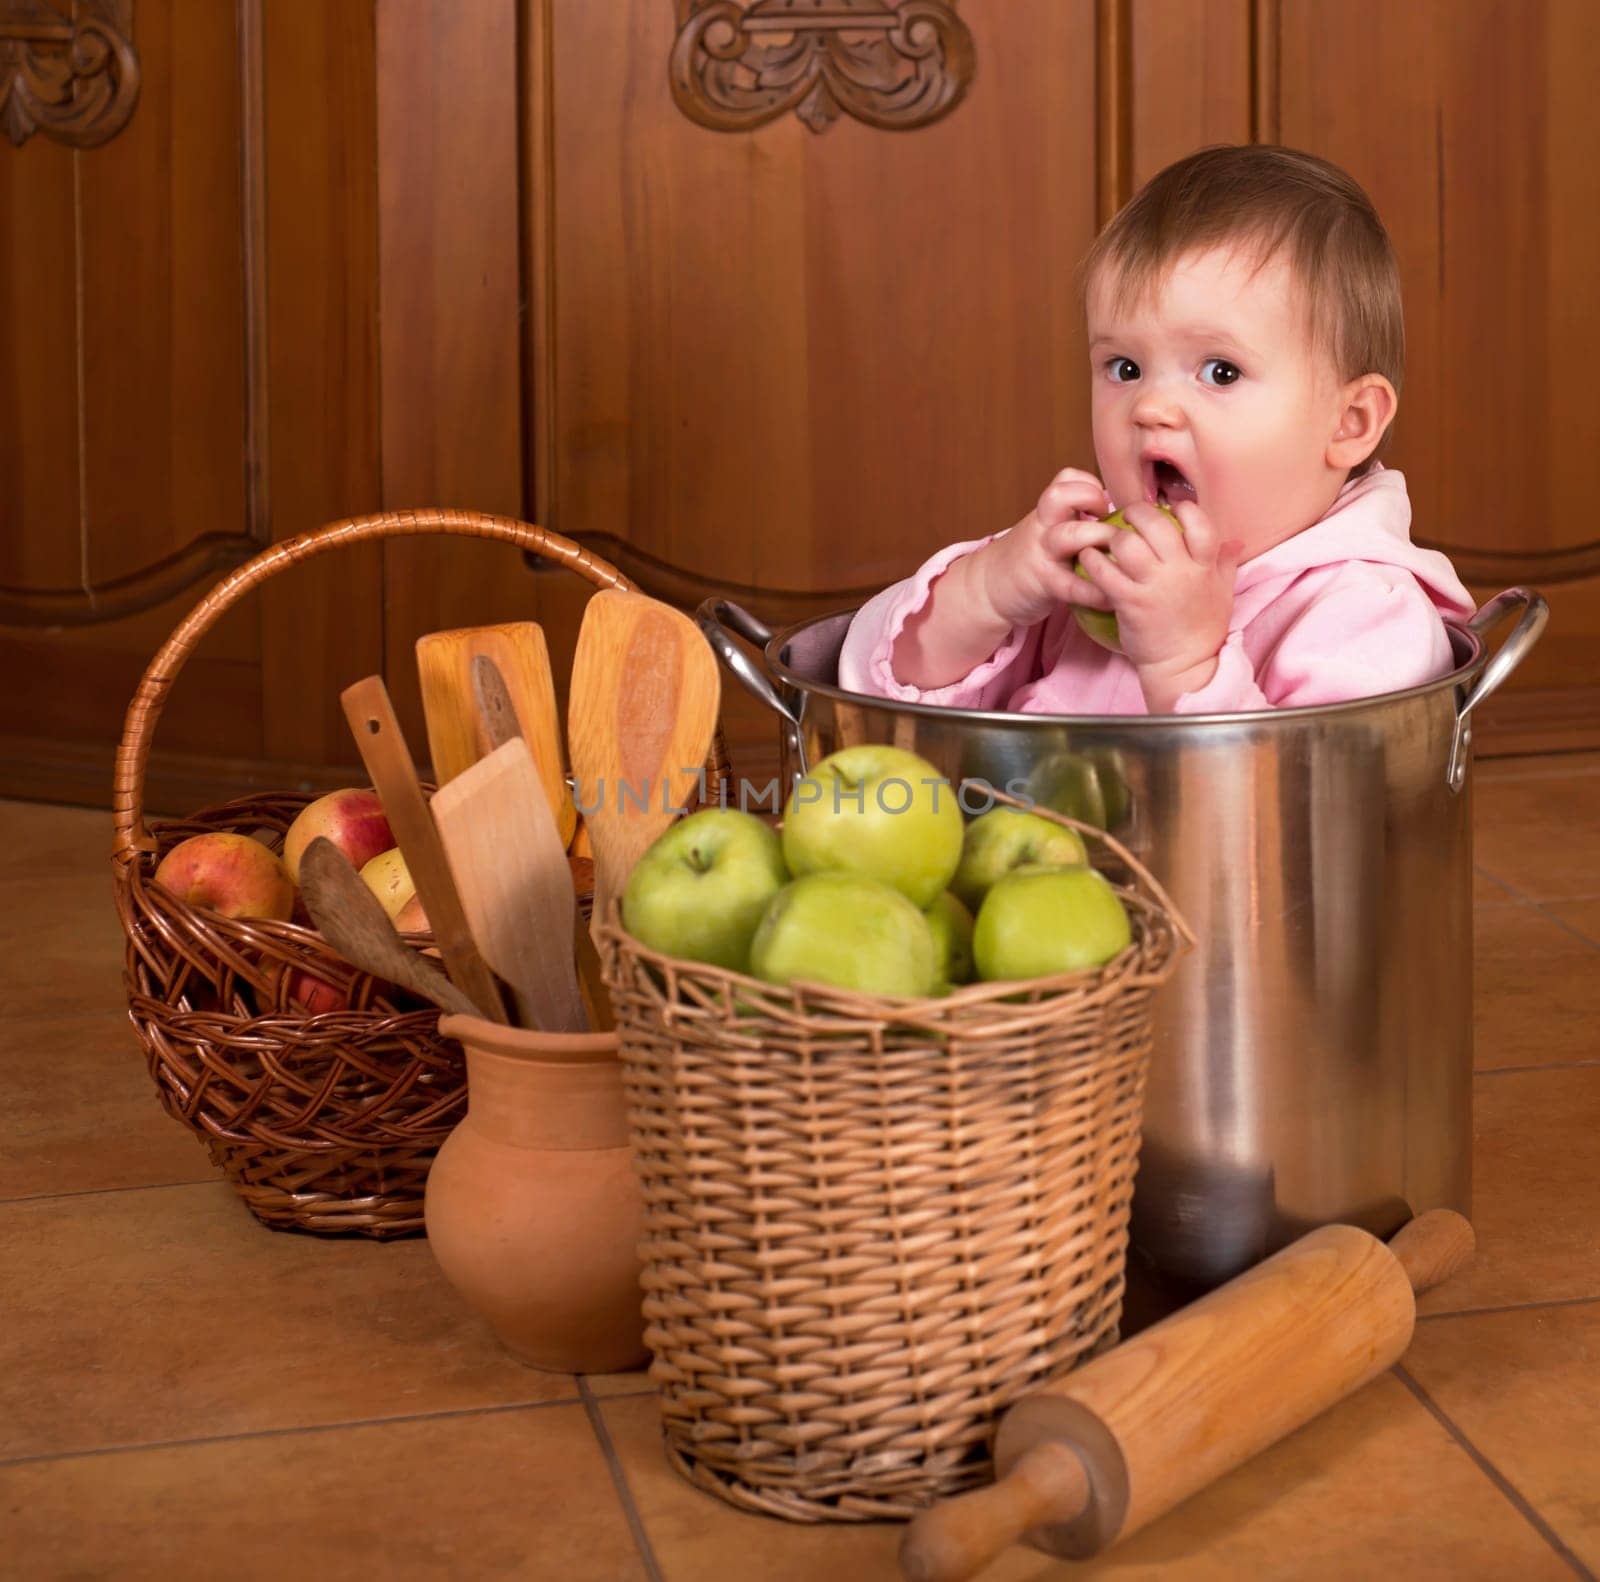 children pots and vegetables. Portrait of a smiling baby sitting inside a large cooking stock pot surrounded by vegetables and food by aprilphoto